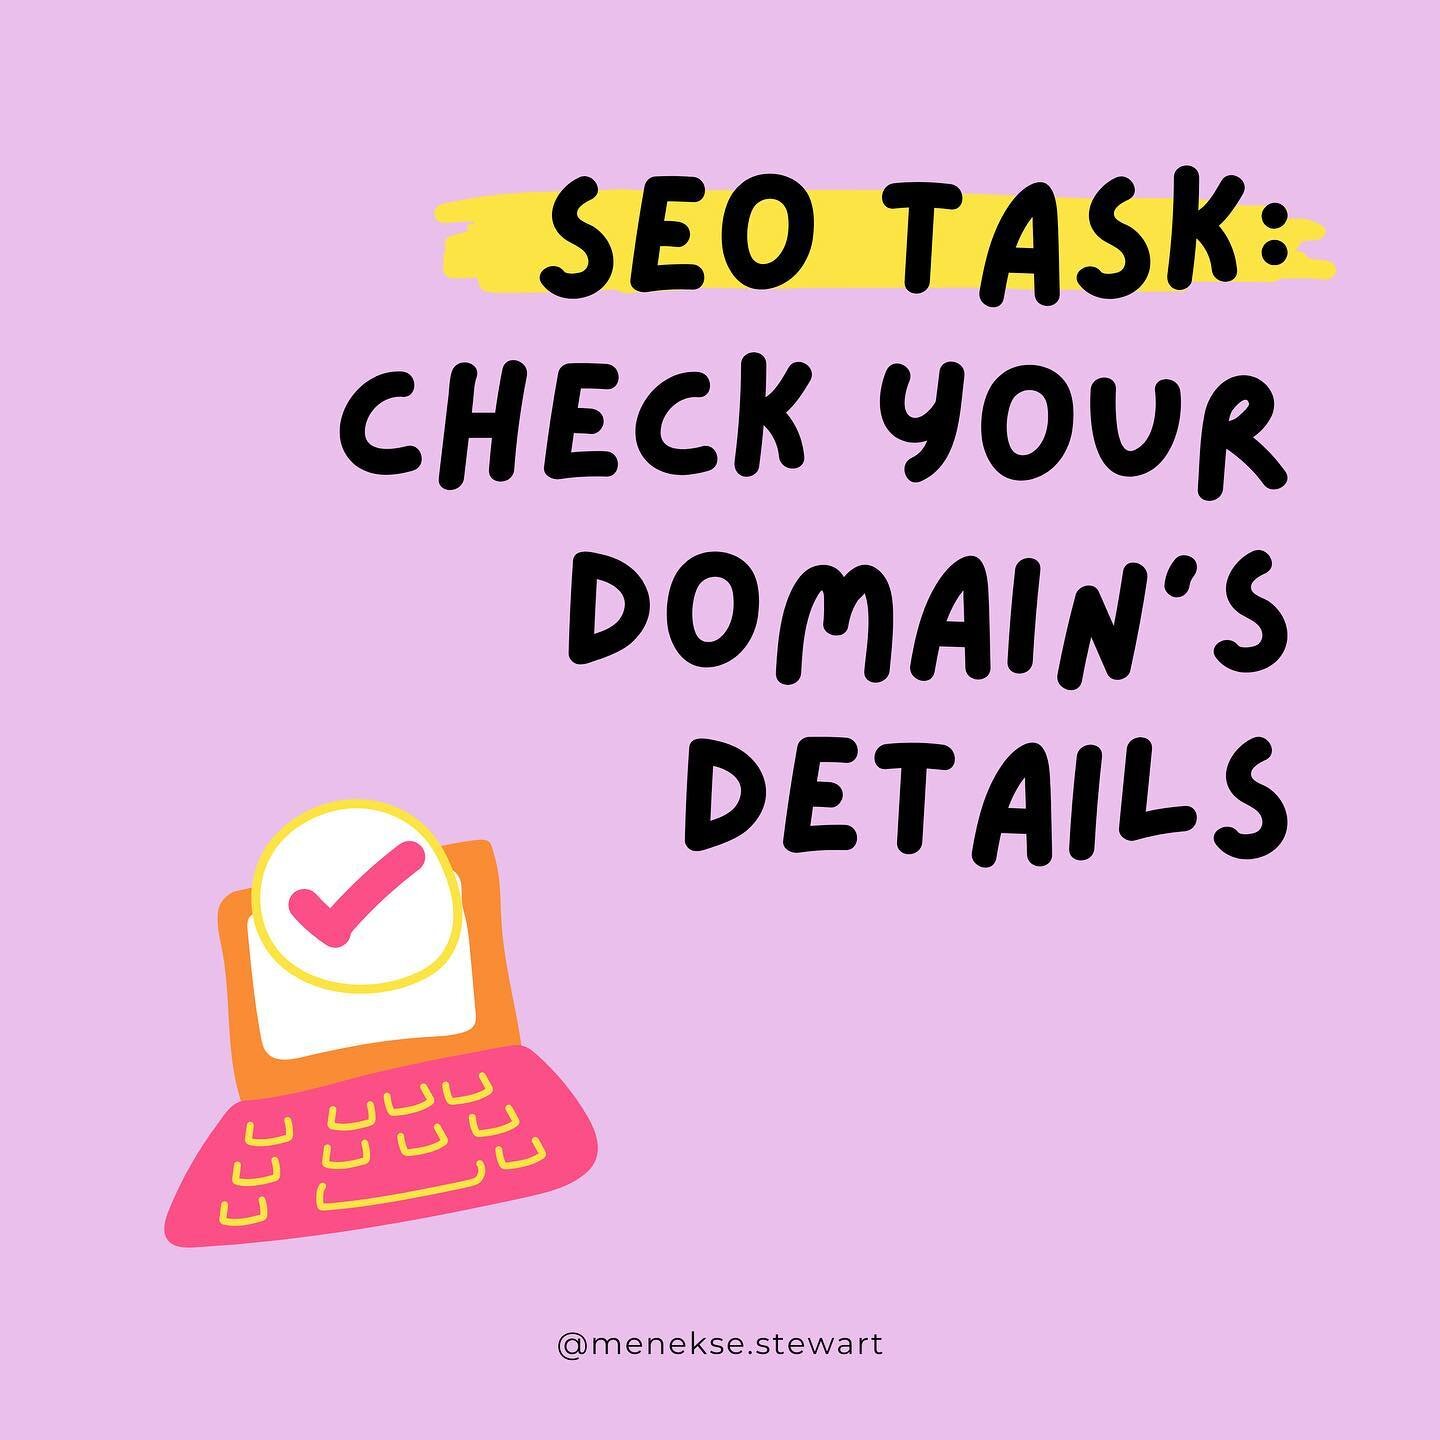 30 Days of SEO: Day 4 🔎

🔲 Task: Make sure your contact information is up-to-date!

Today, we are going to be checking that all of our contact and address information is up-to-date on the internet.

What can often happen is that we buy a domain, sa